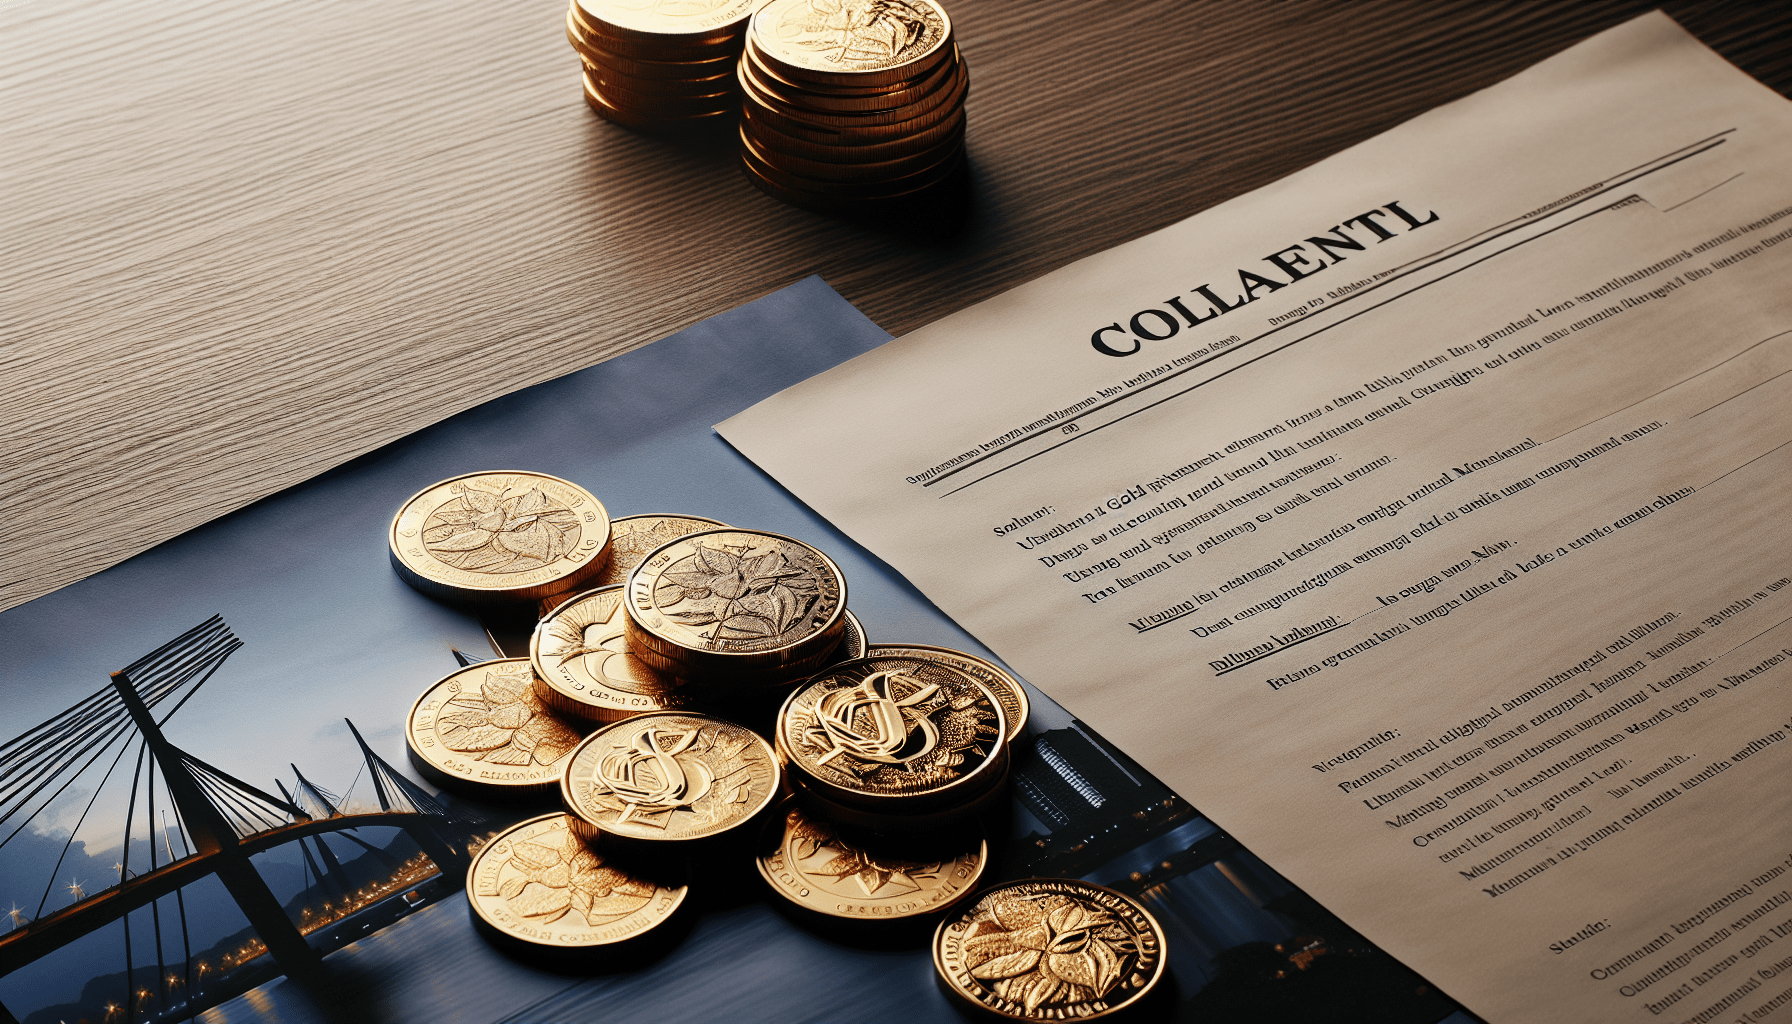 Can I Use My Gold Investment As Collateral For A Loan With Malaysian Banks?